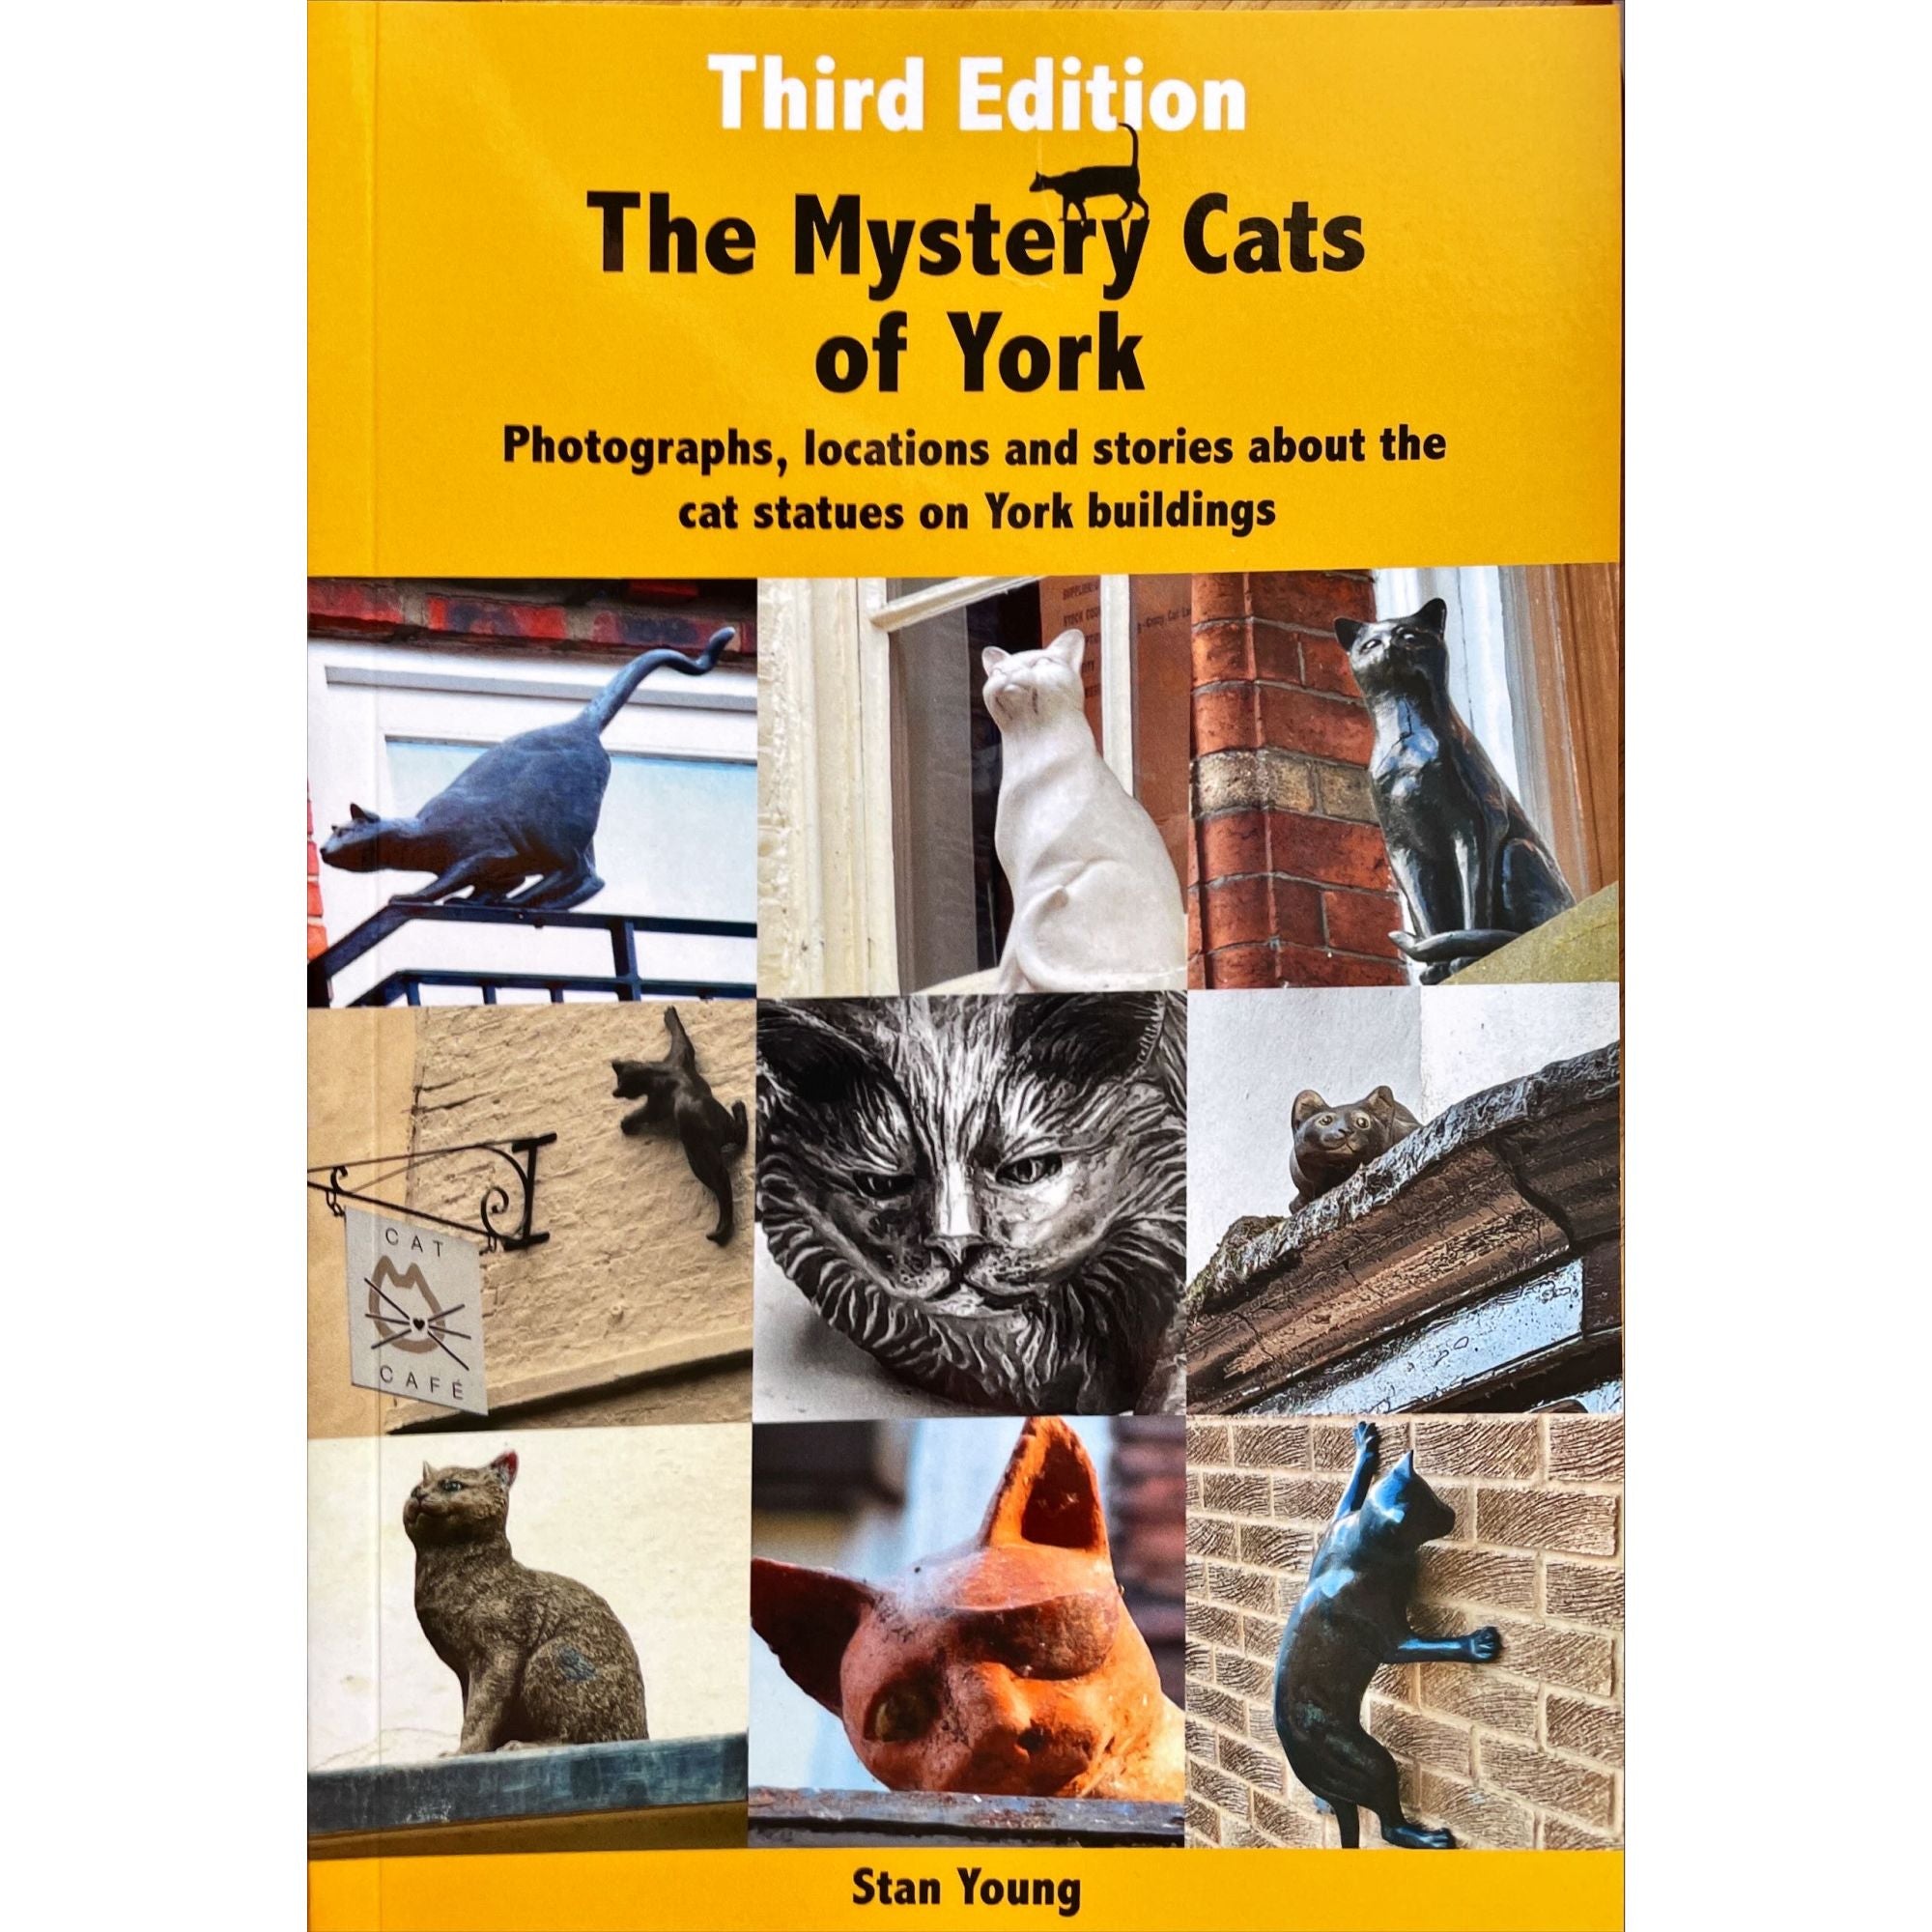 The Mystery Cats of York